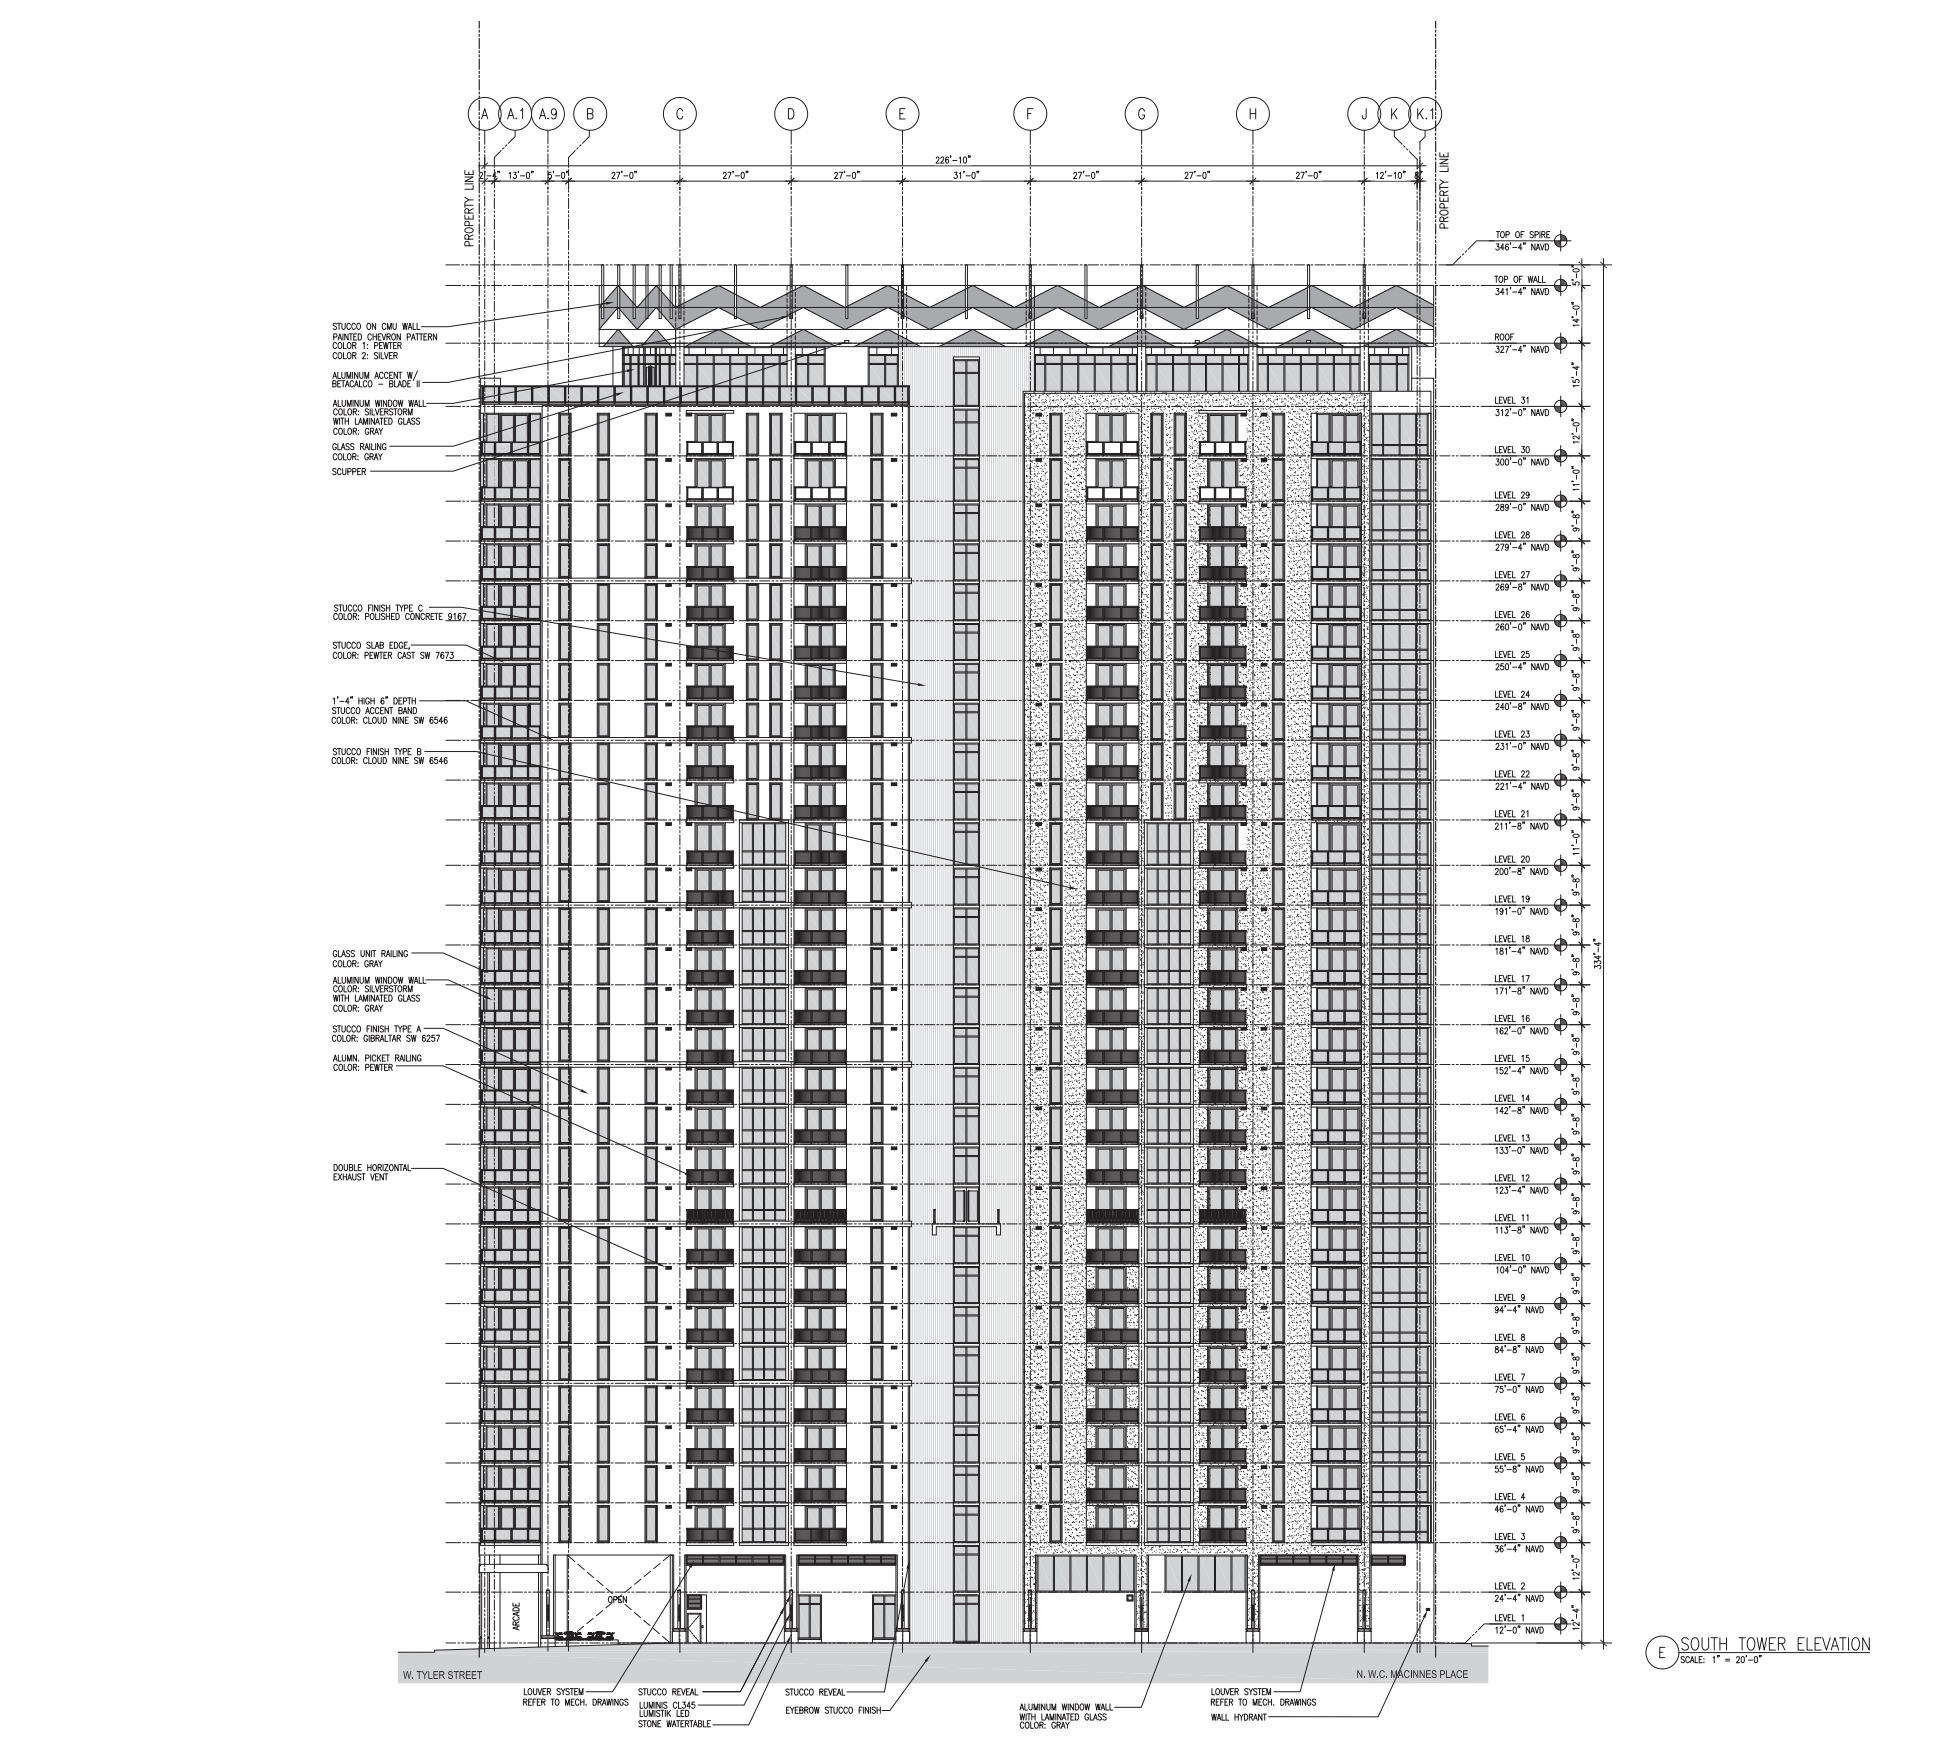 South Tower Elevation. Courtesy of Cube 3.